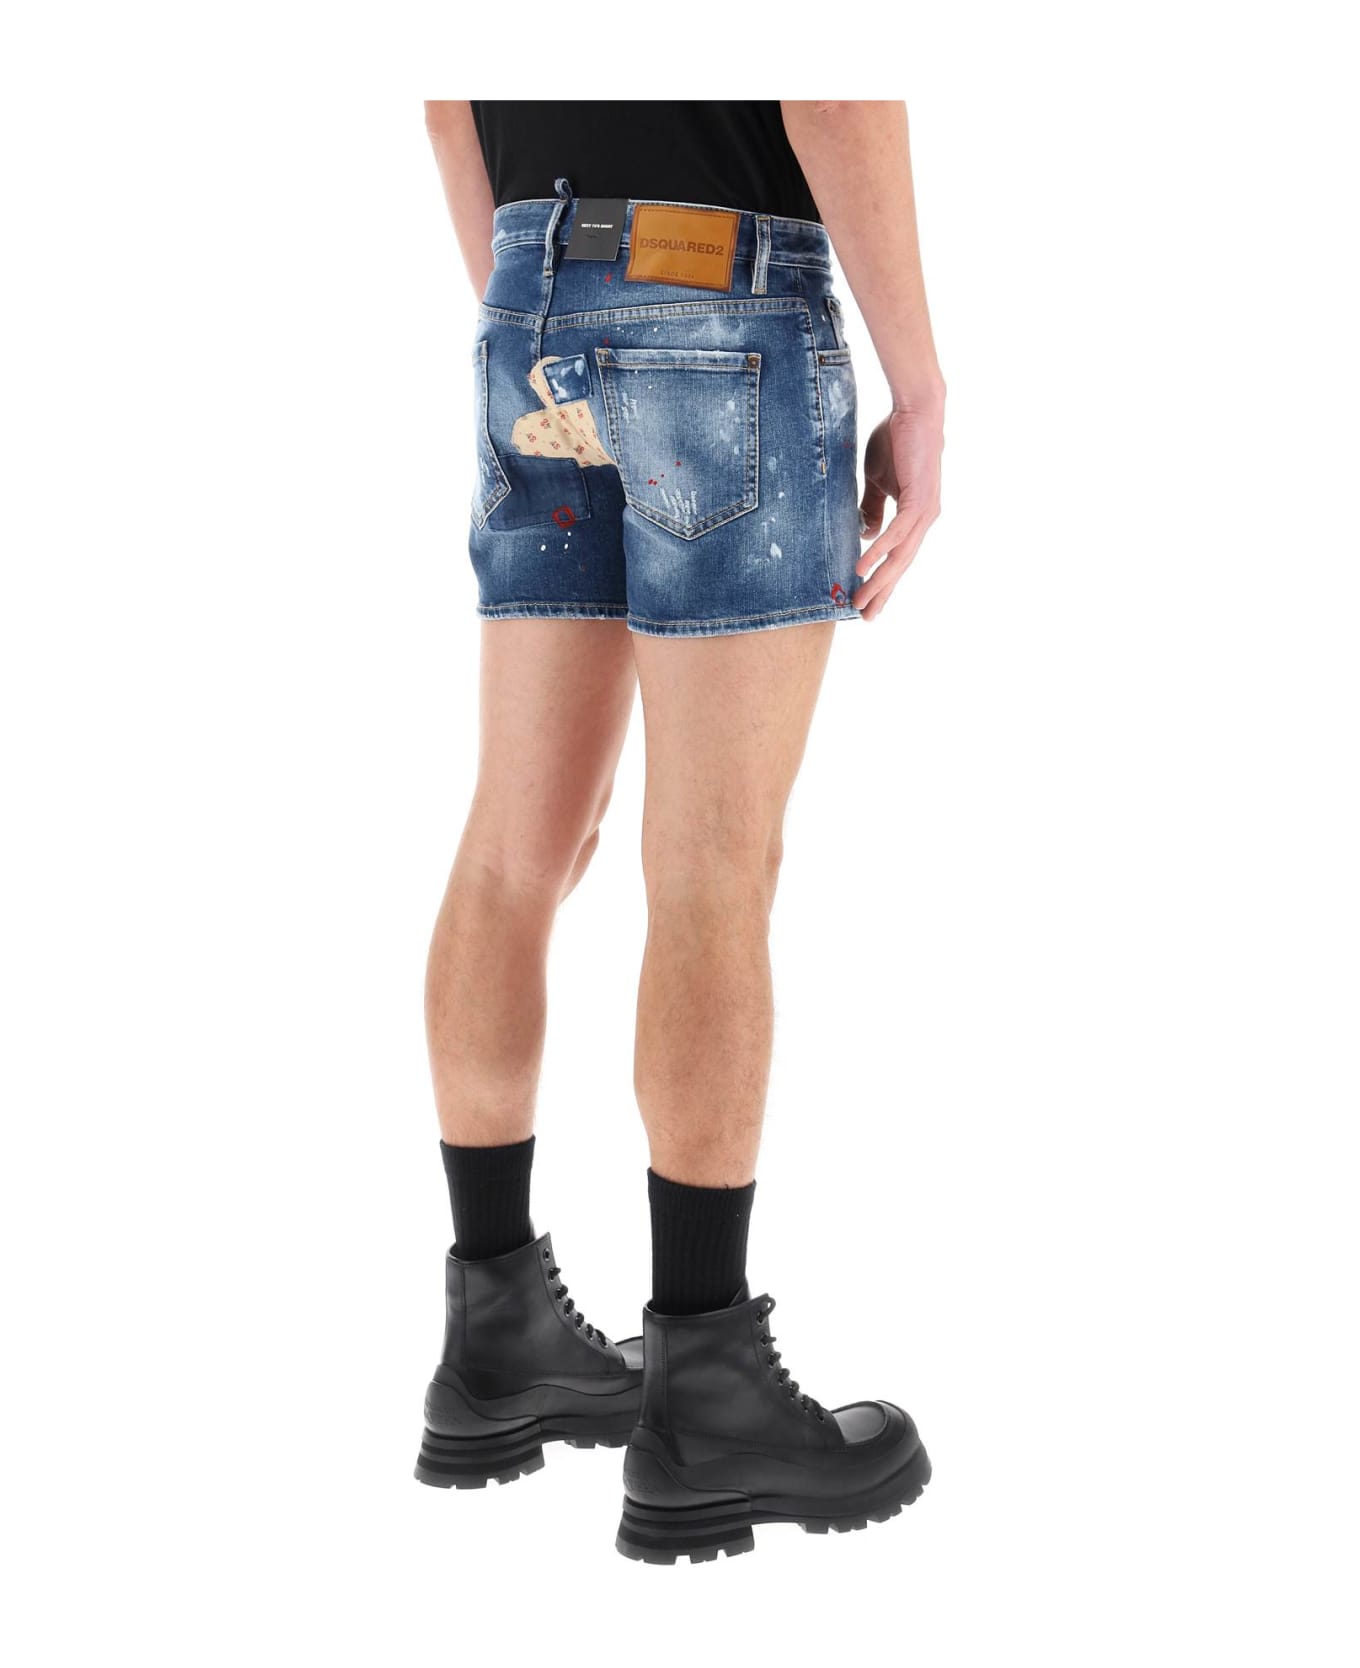 Dsquared2 Sexy 70's Shorts - NAVY BLUE (Blue)